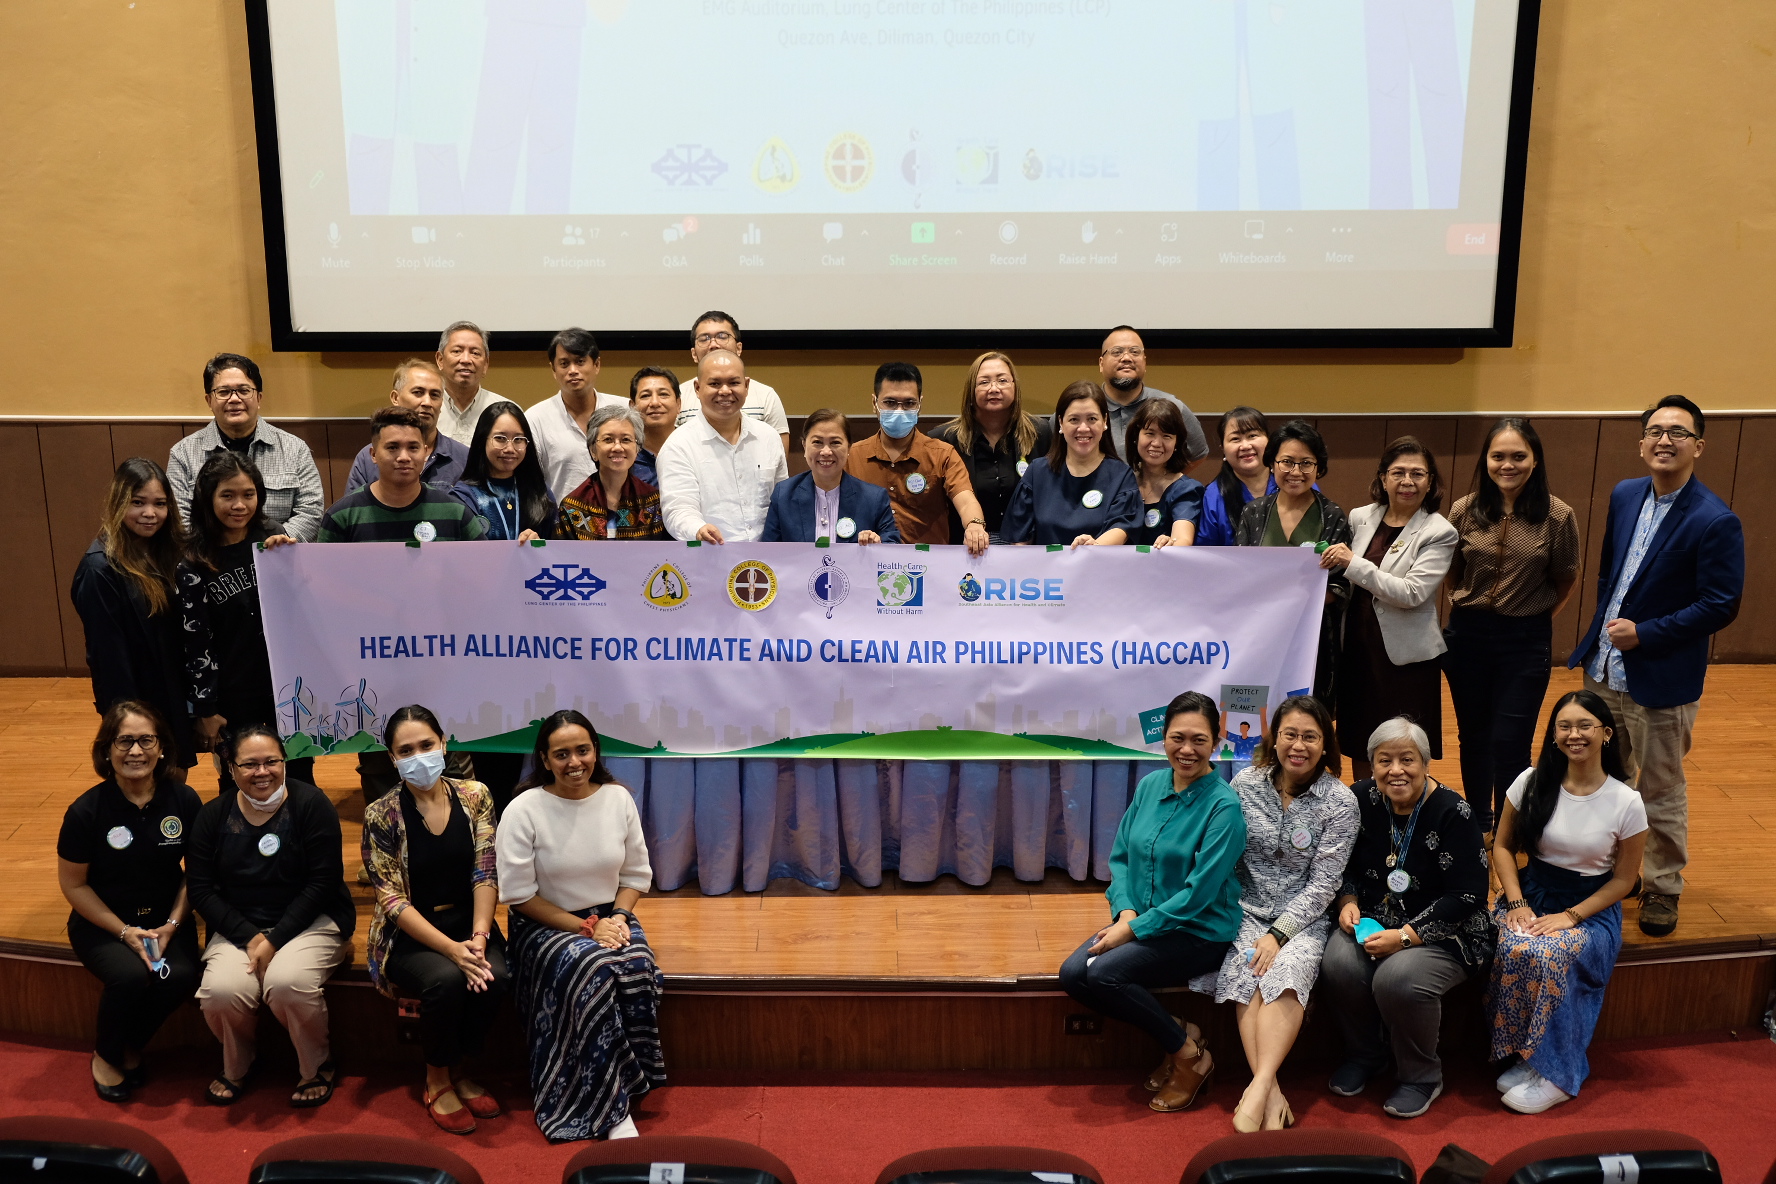 Health Alliance for Climate and Clean Air Philippines